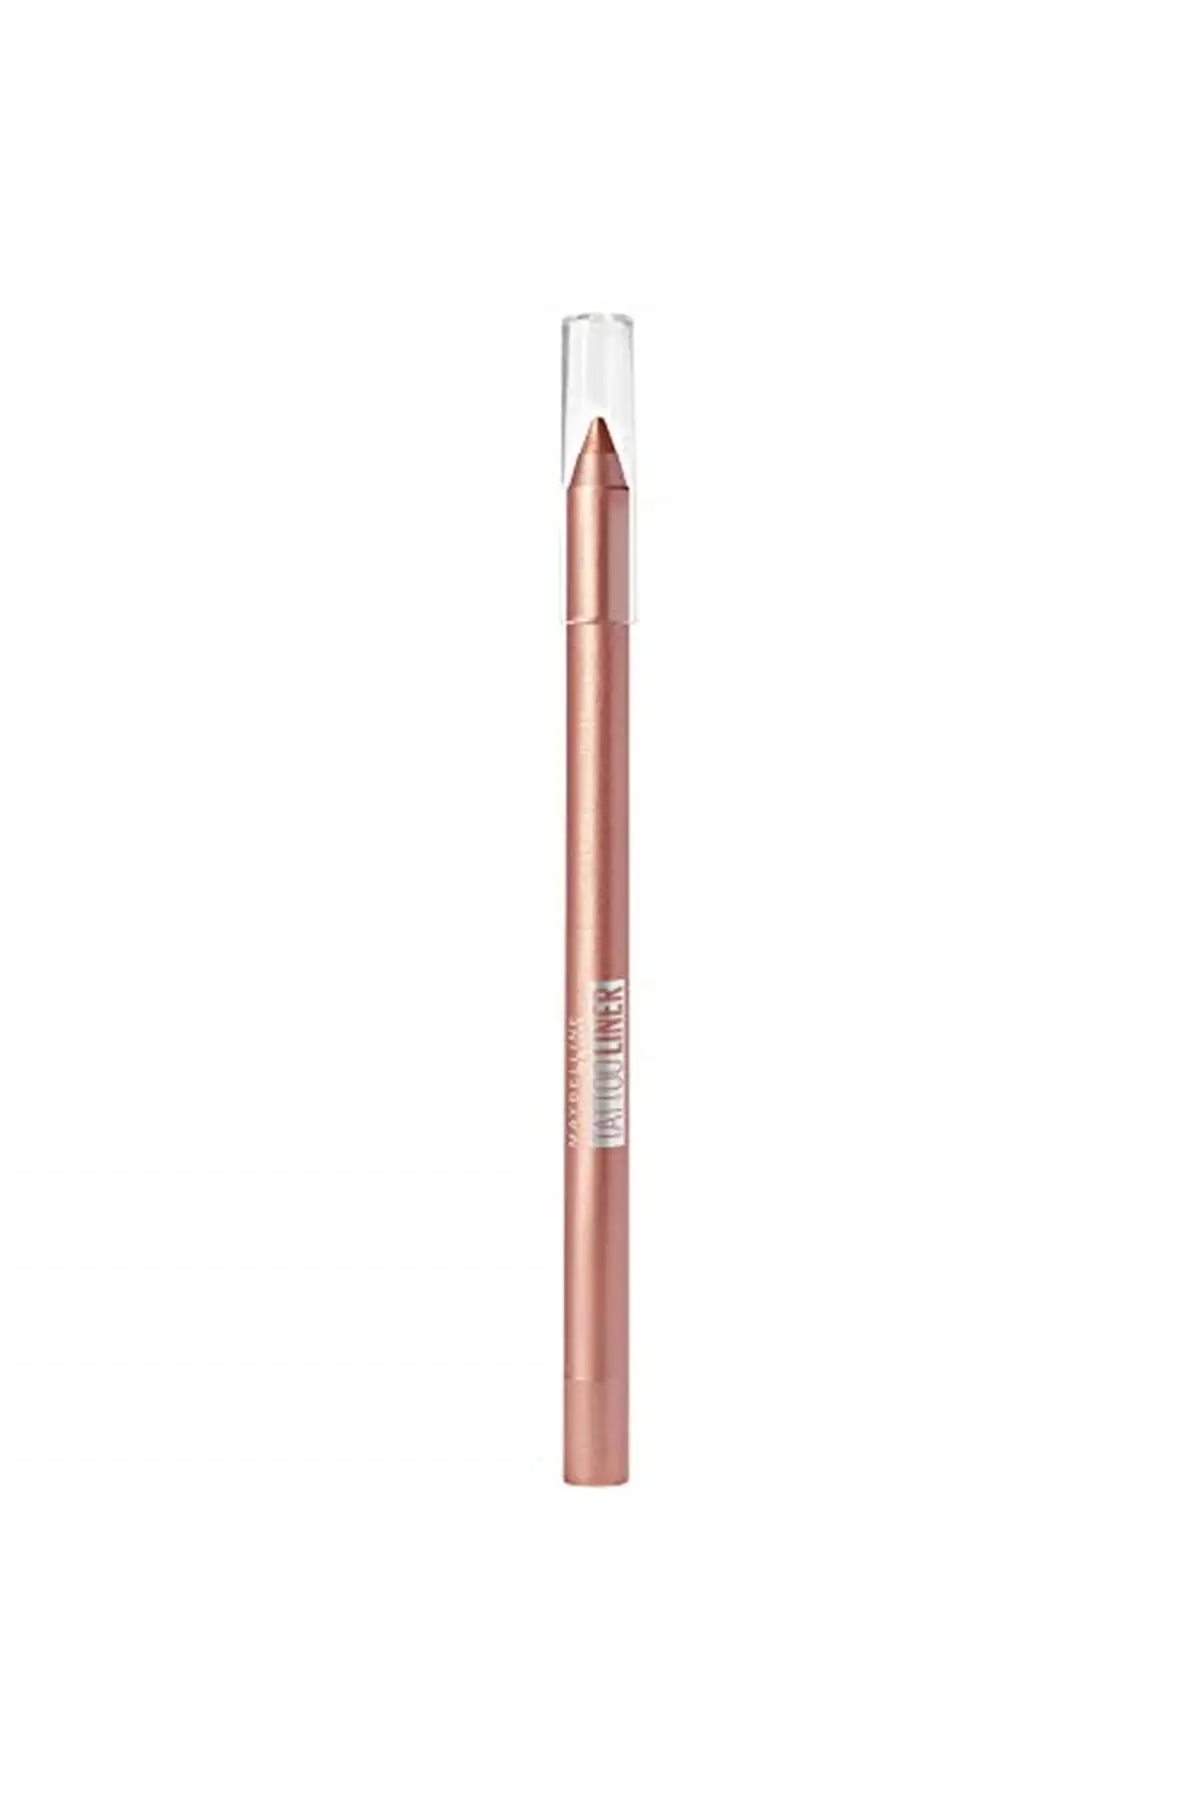 

Brand: Maybelline New York Tattoo Liner Gel Eye Liner, 950 Rich Clay (Red Brown) Category: